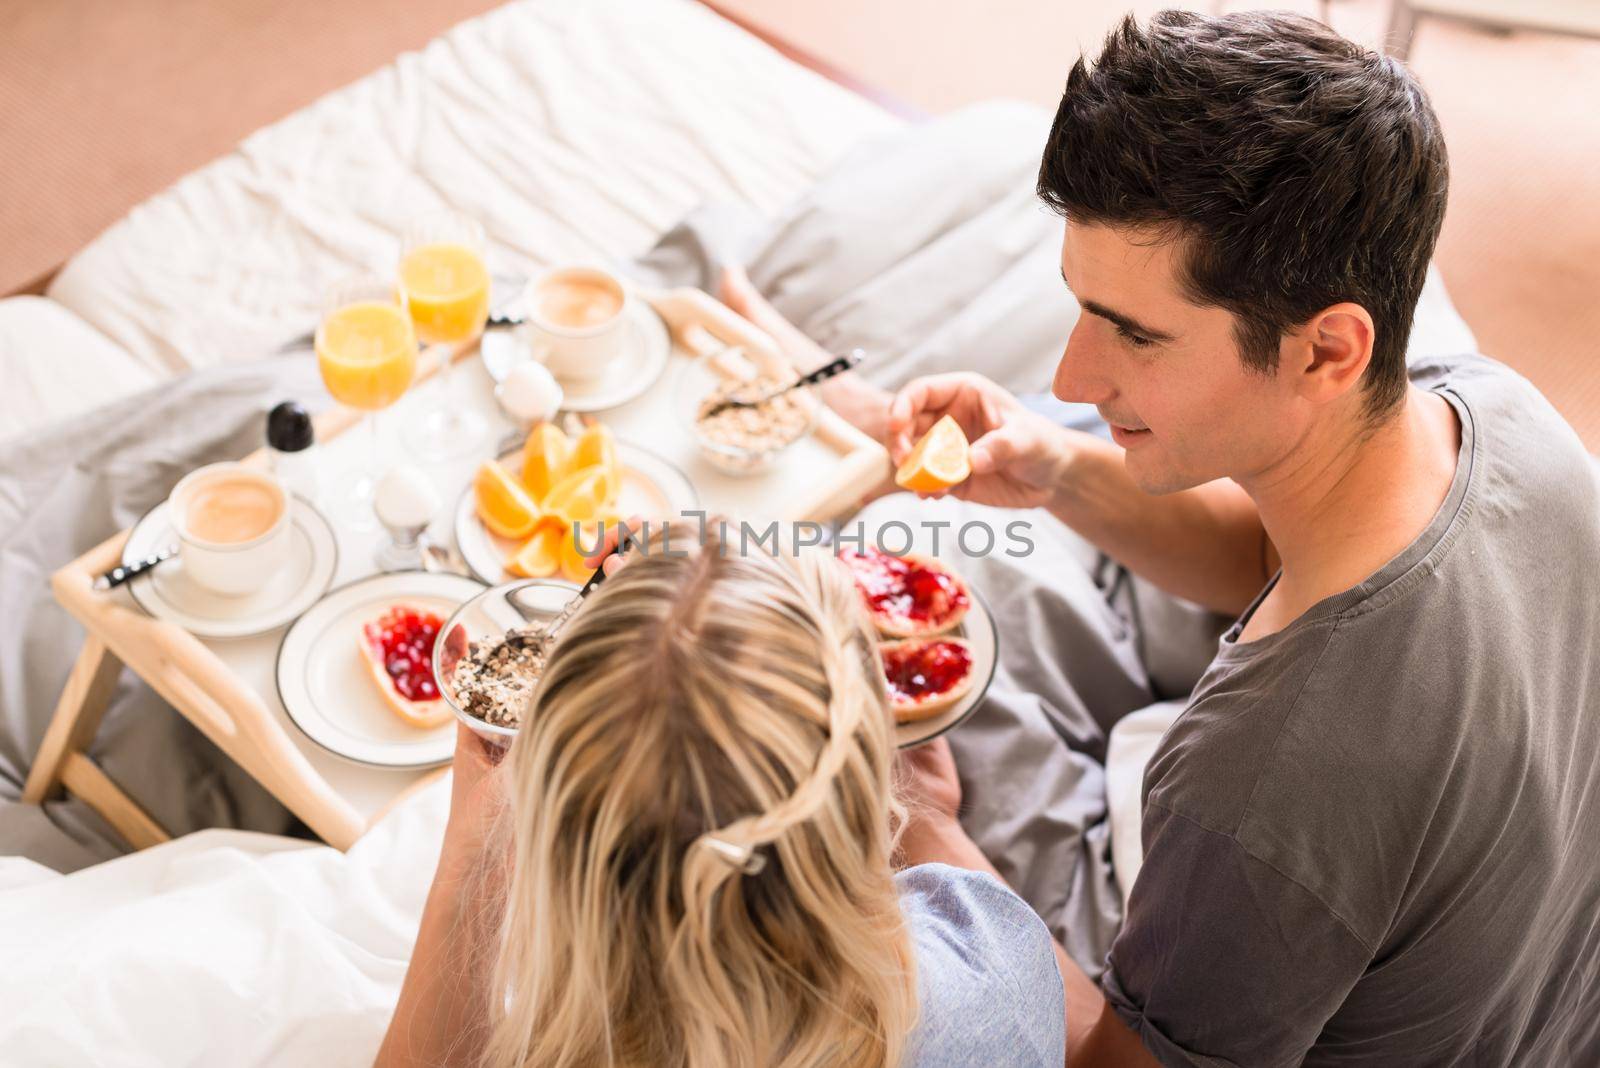 Close-up of romantic healthy breakfast with orange juice, jam, cereals and coffee